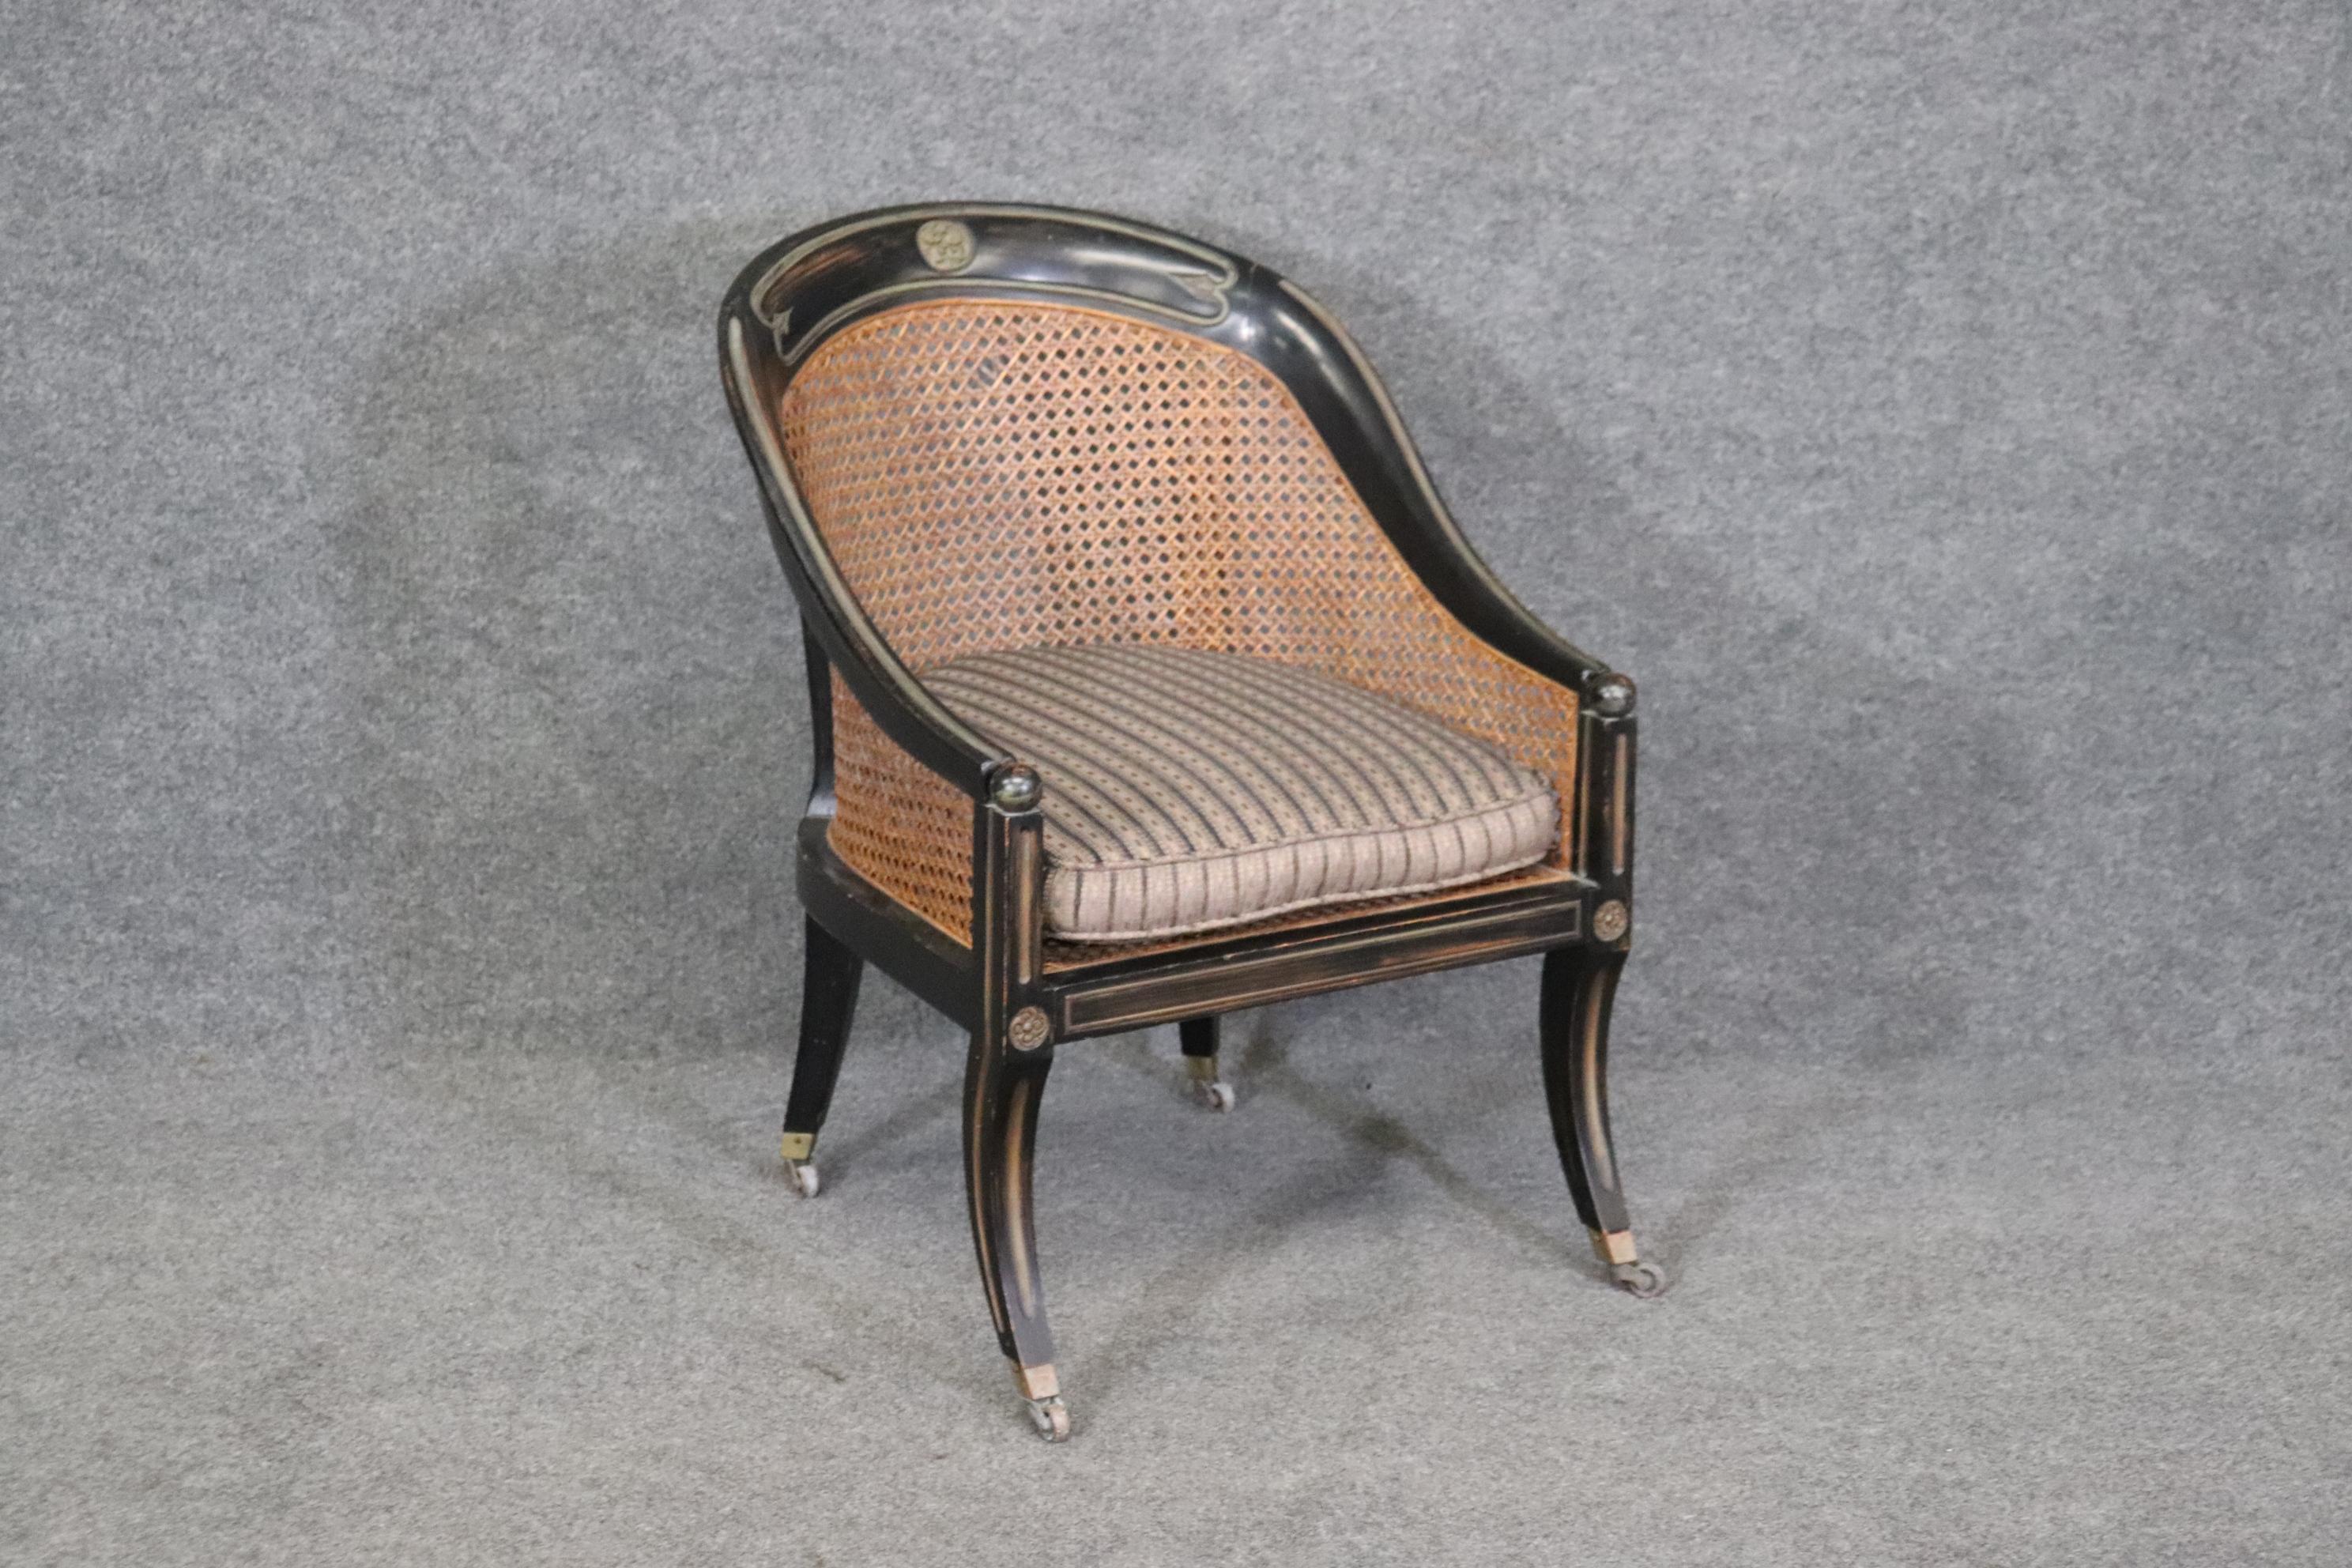 This is a beautiful French Louis XVI cane back lounge chair. The cane has one spot where it is damaged but this can be either loved the way it is or repaired. The chair is from the 1930-40s era and measures 30.75 tall x 22.5 wide x 24.5 deep and the